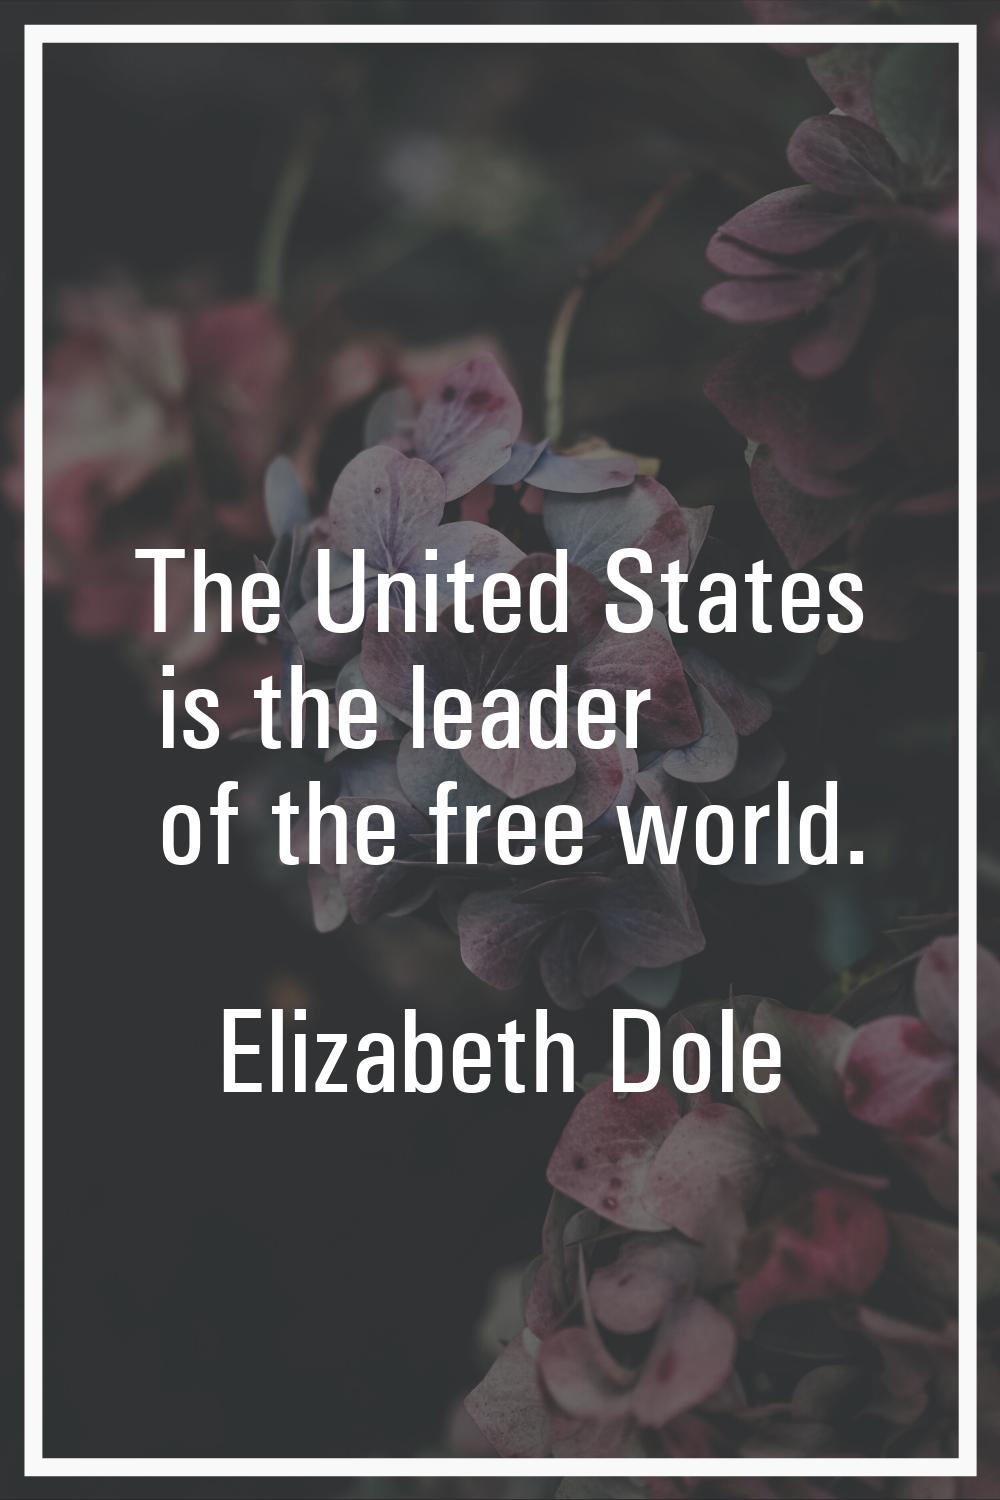 The United States is the leader of the free world.